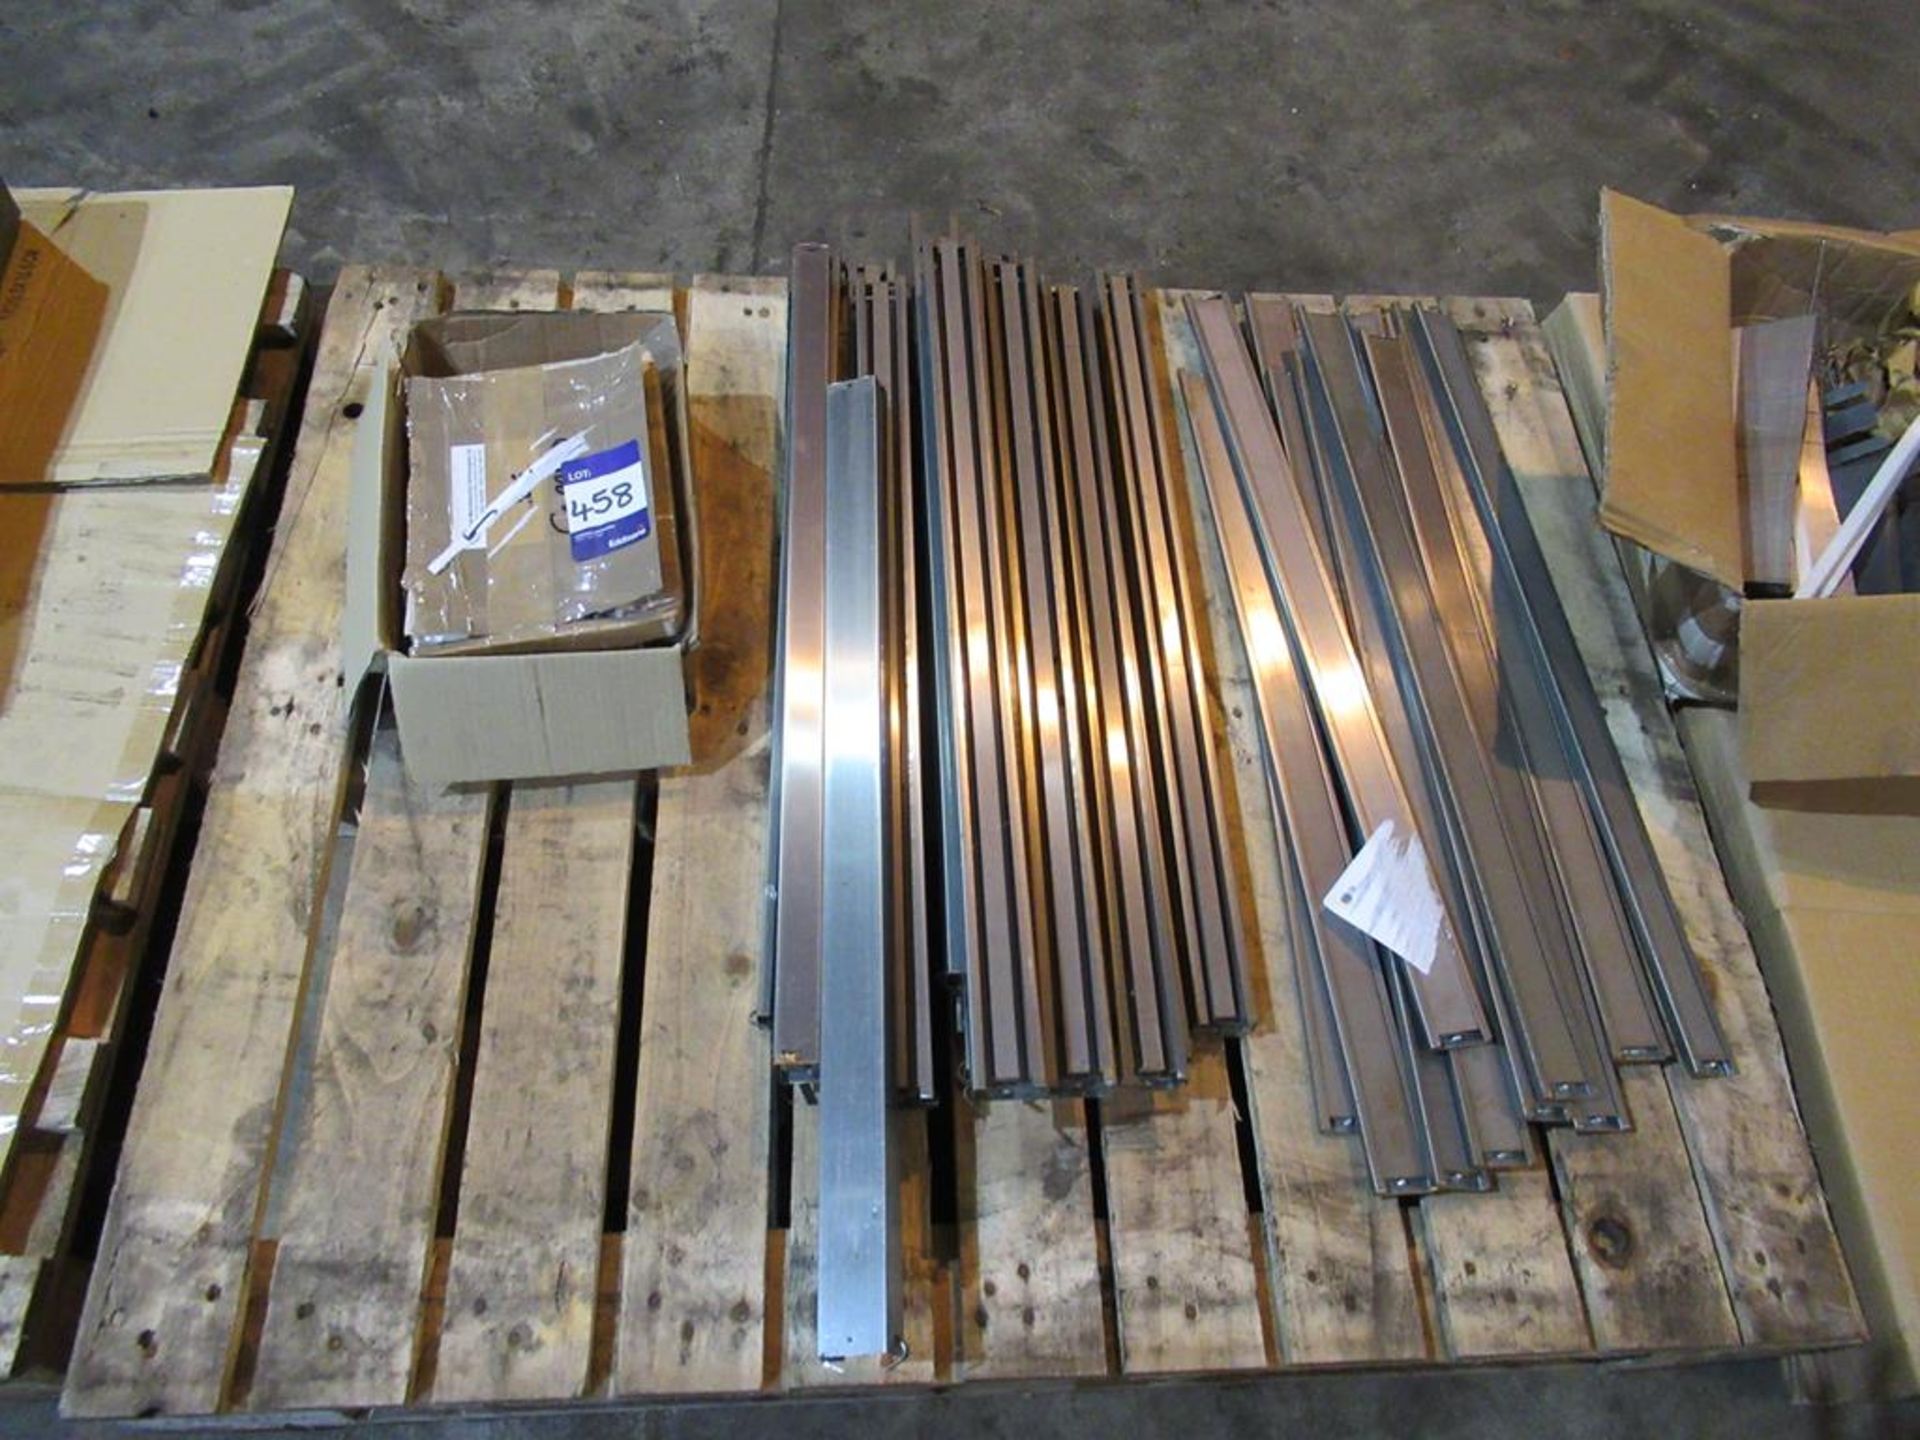 Lot of 93 kg EI 42 Linlox Laminations, and appx 50 ETD 29 ferrite Cores